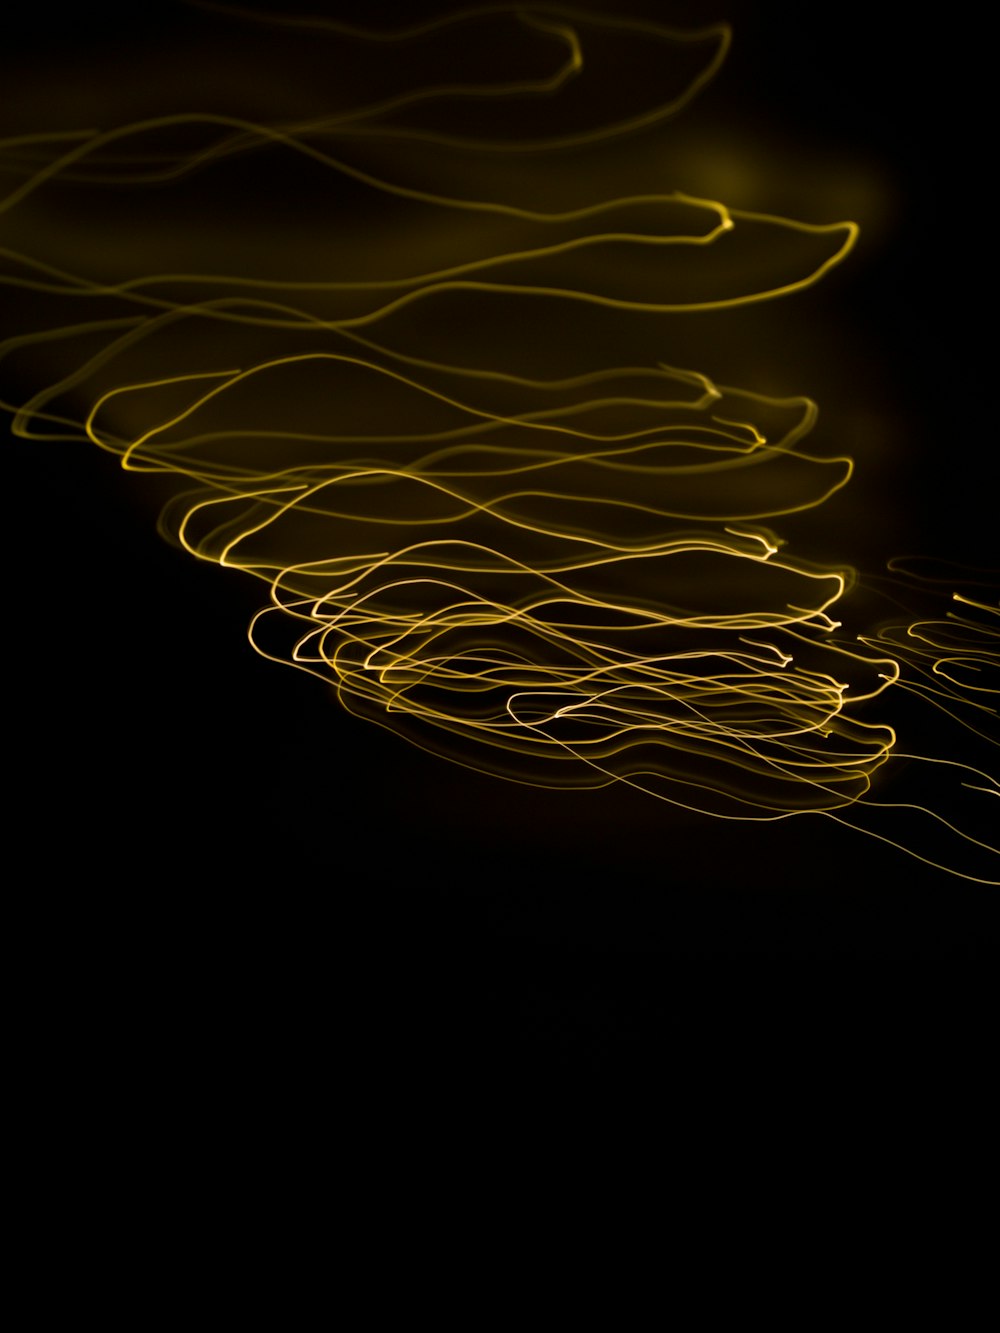 a long exposure photo of yellow lines on a black background